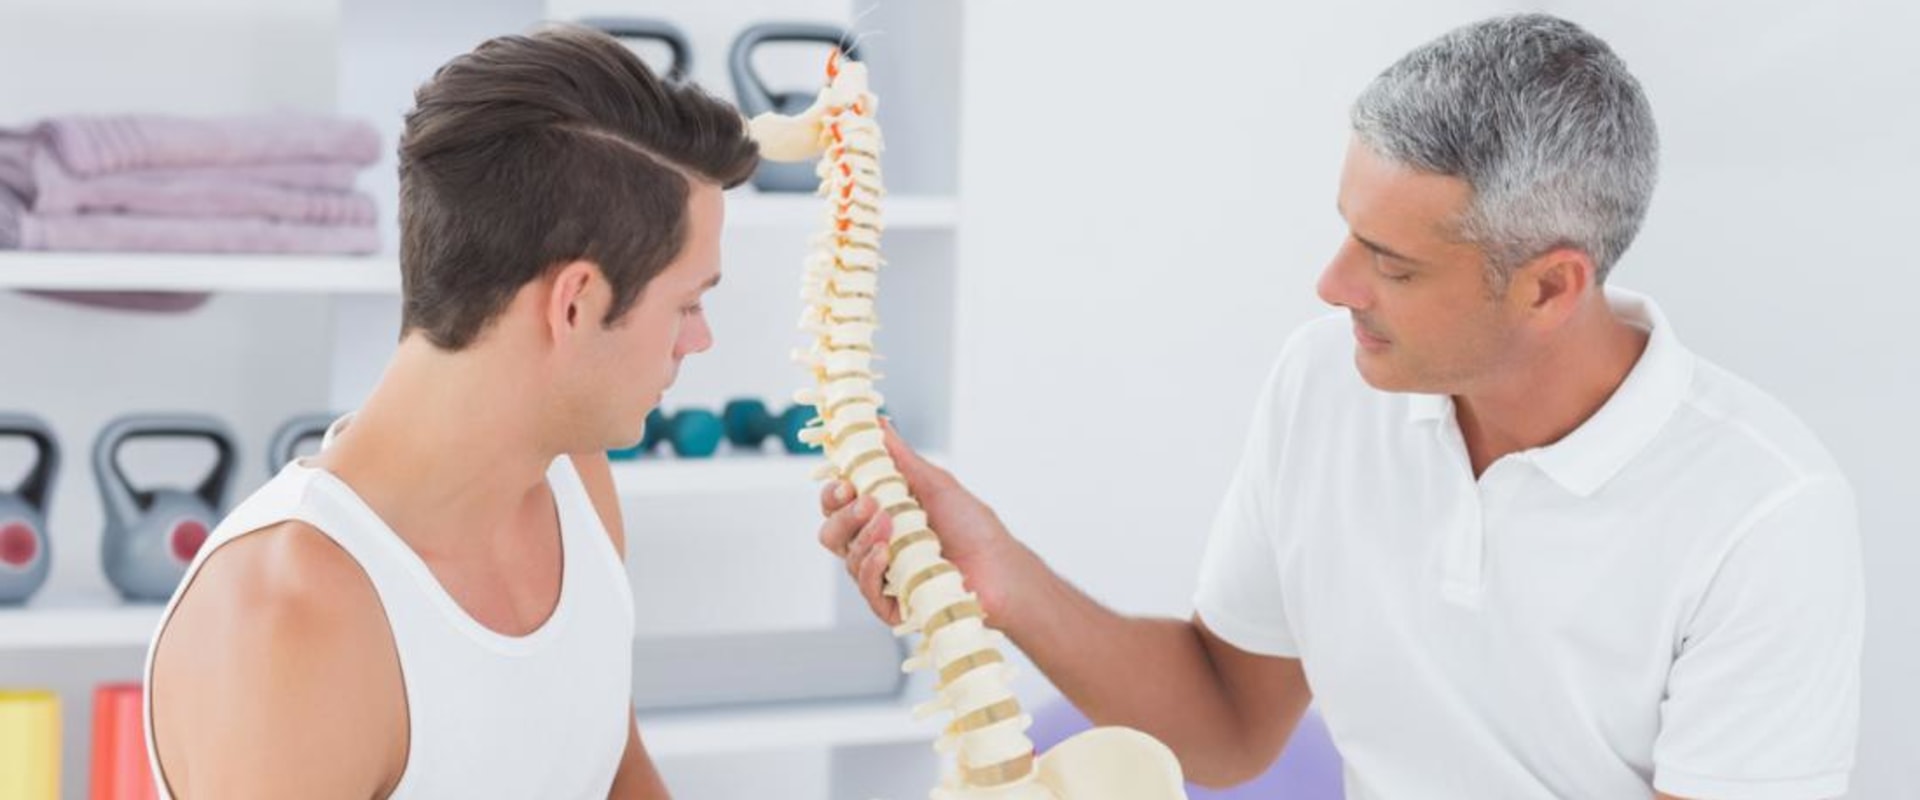 Where to study osteopathy?